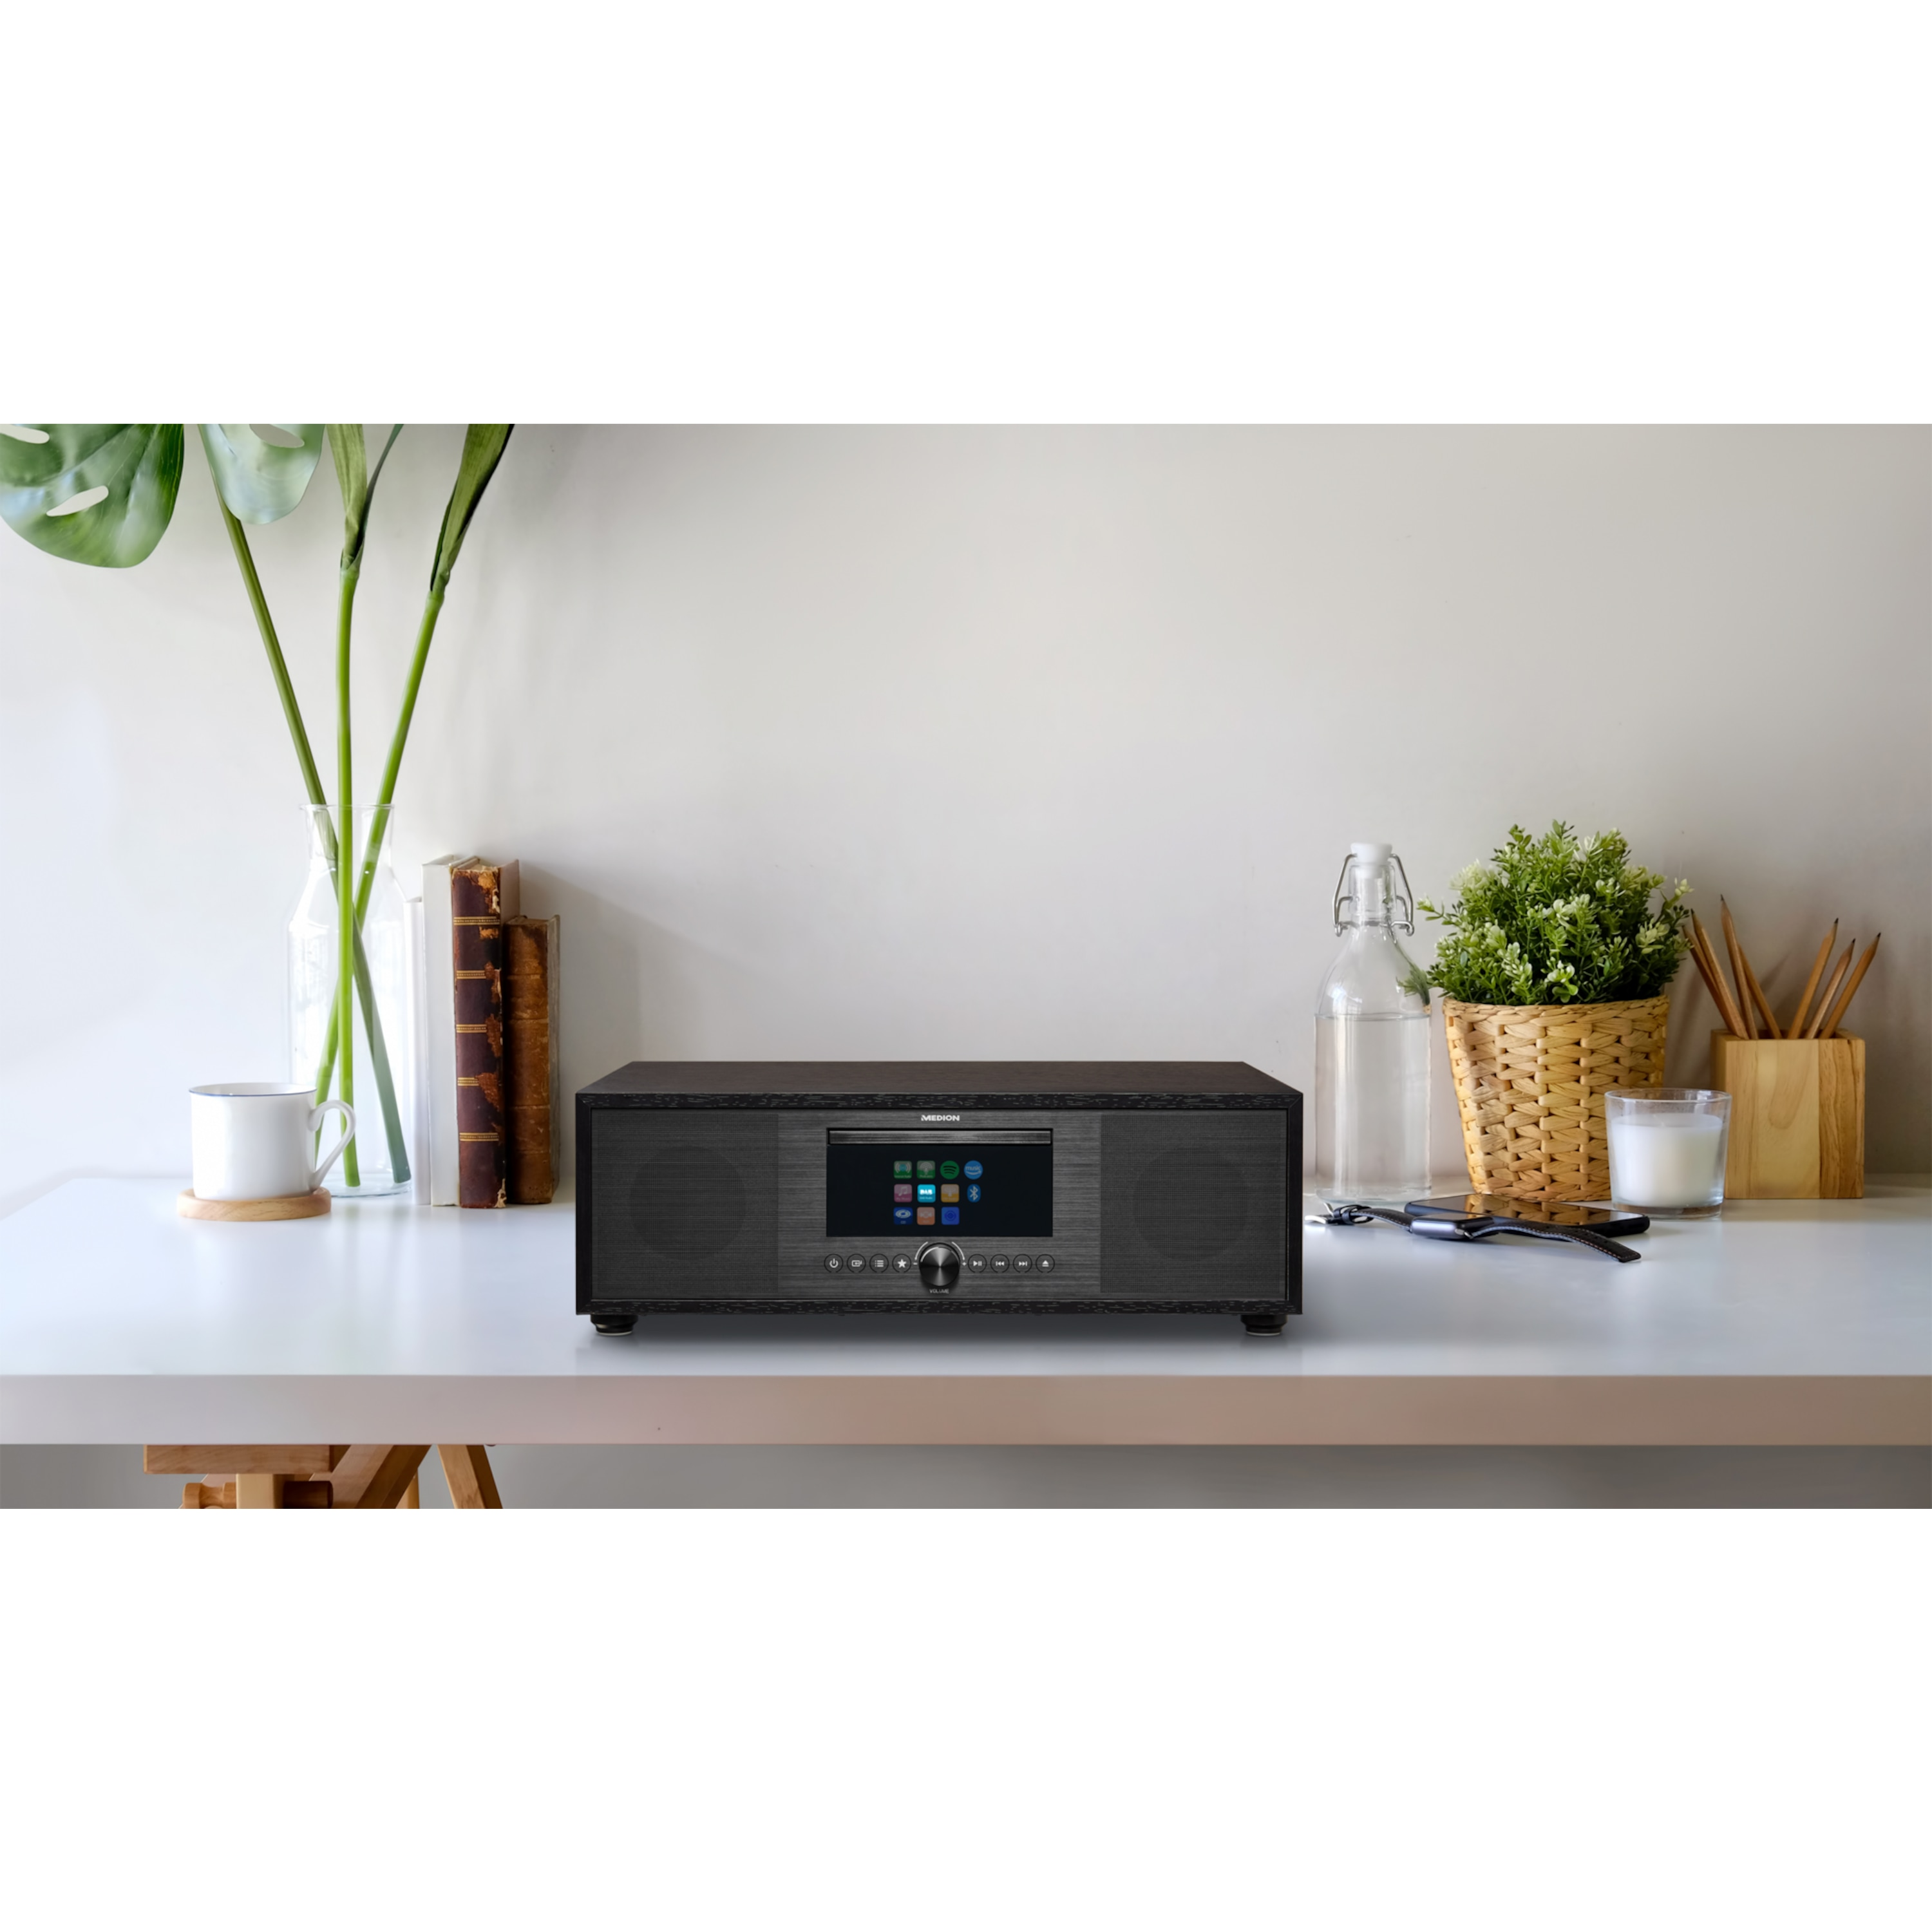 MEDION All-in-One CD/MP3- WLAN Radio, KW, Audio Internet/DAB+/PLL-UKW Internetradio, System, P66400 Player, Bluetooth®, LIFE® anthrazit